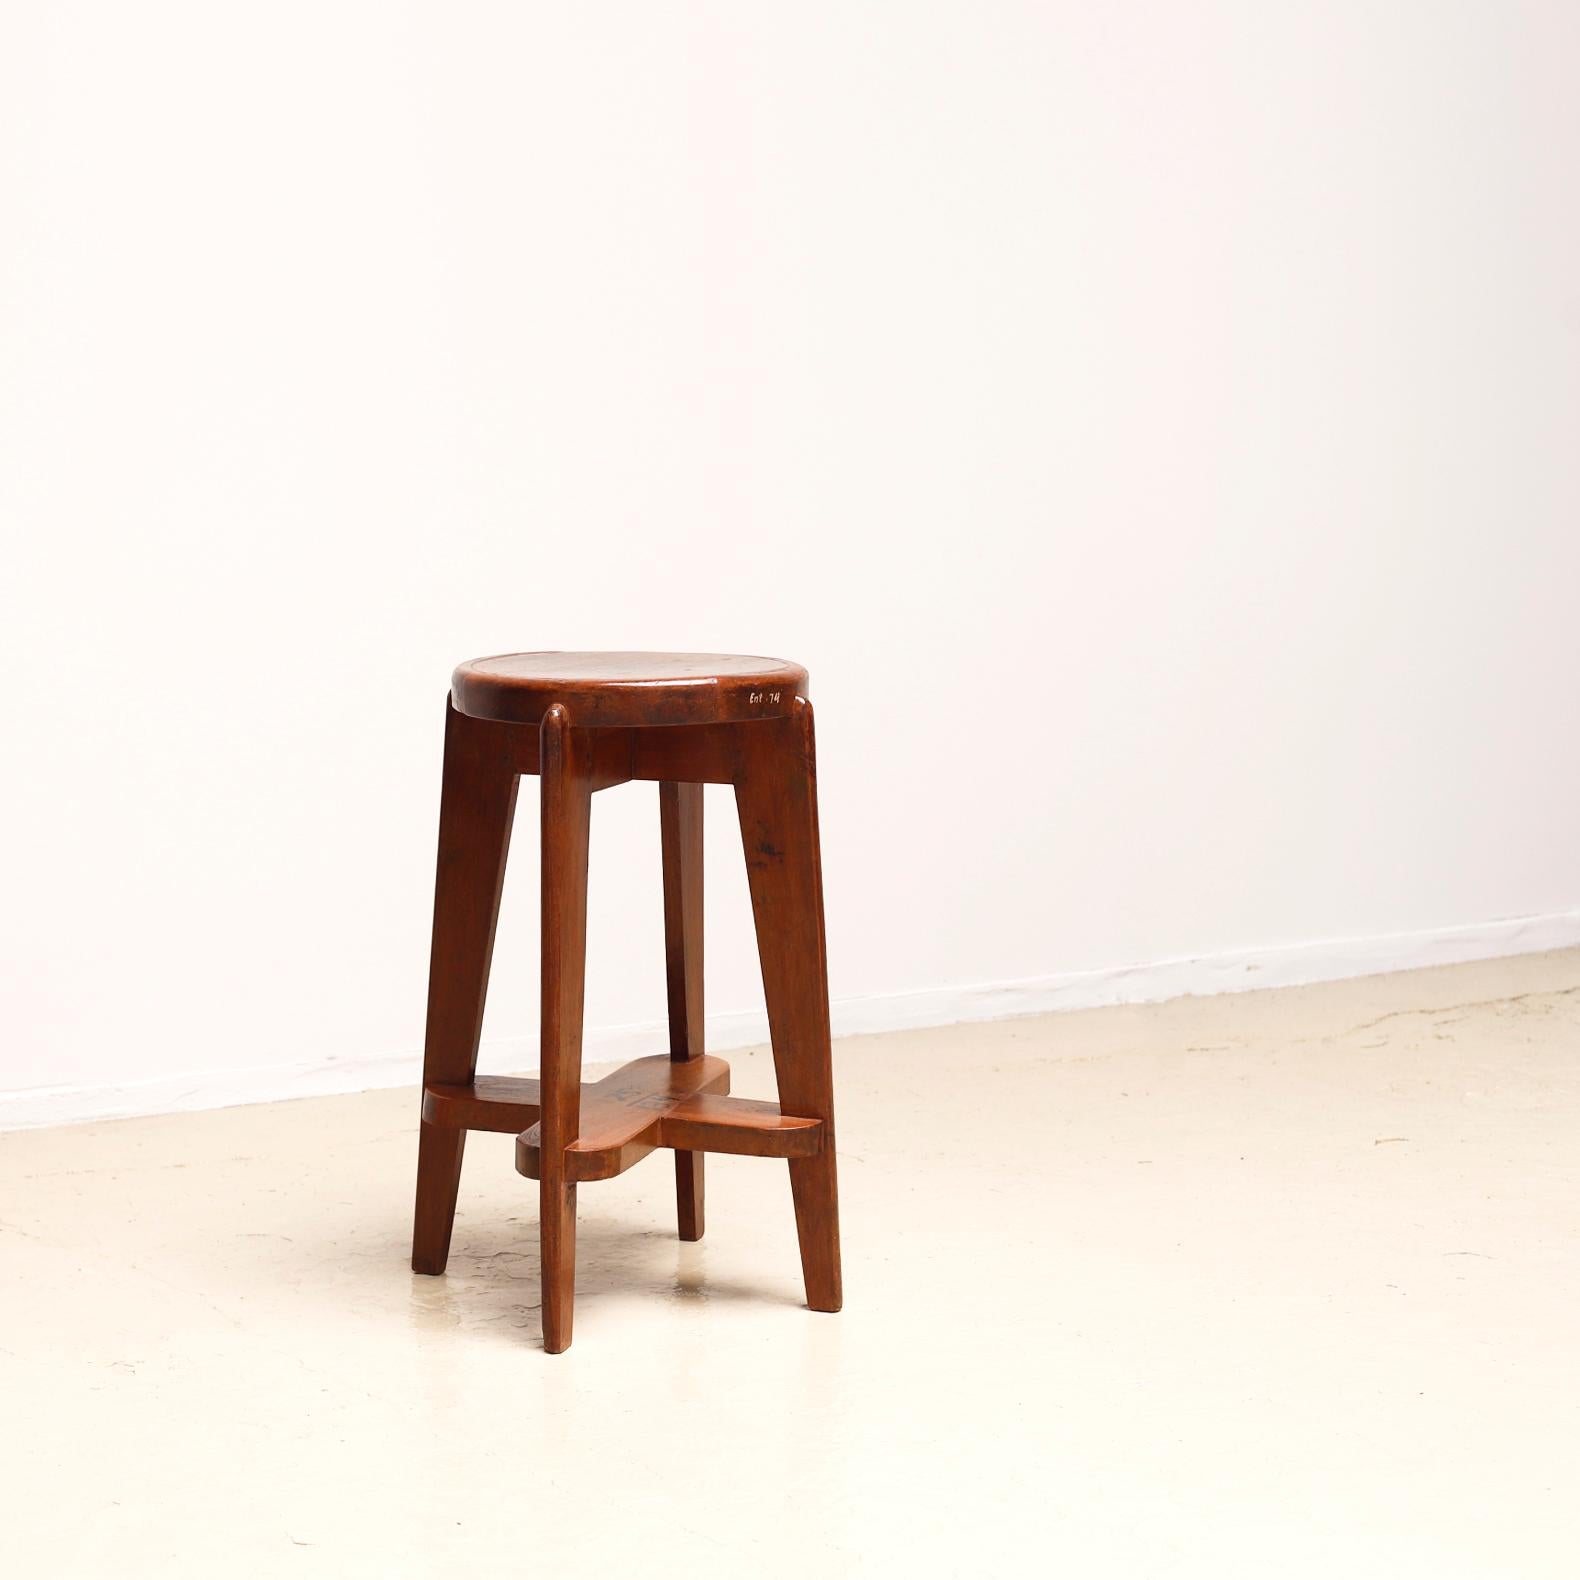 Teak high stool designed for Chandigarh project by Pierre Jeanneret, circa 1950s.